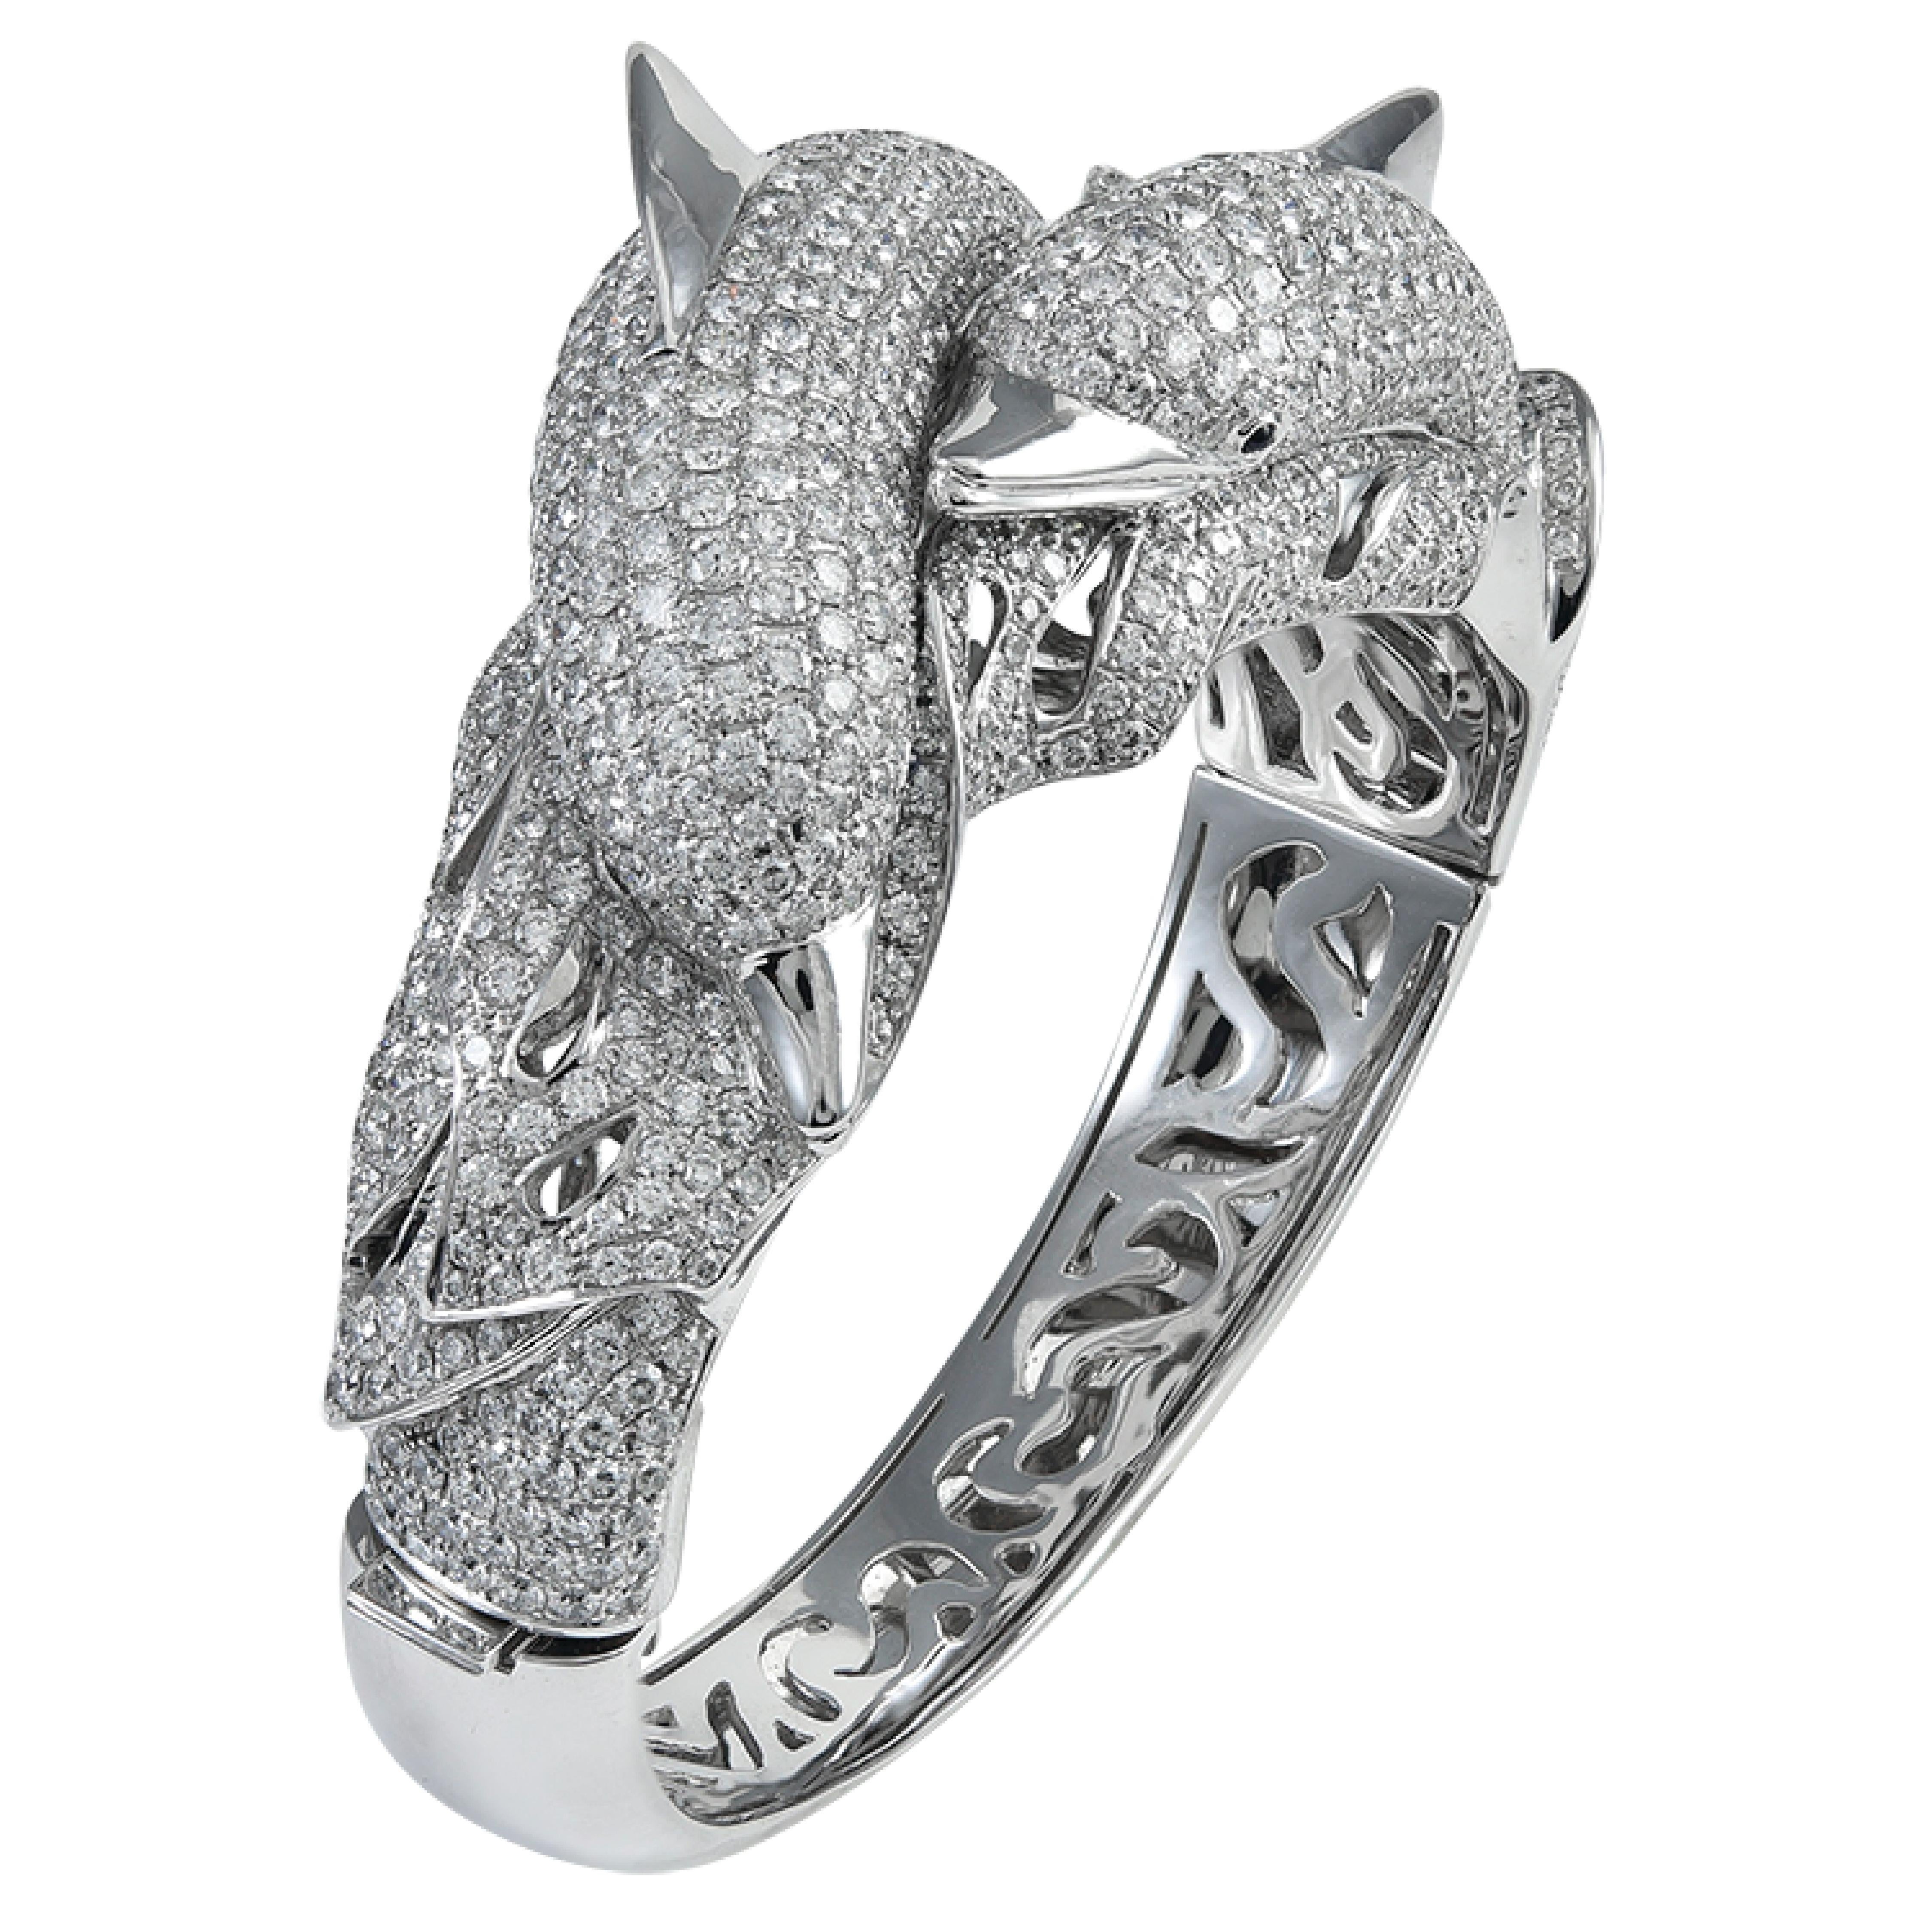 Impeccably designed dolphin shaped cuff created and designed by Sophia D, this cuff features 17.44 carats of brilliant cut diamonds in 18K white gold.

Sophia D by Joseph Dardashti LTD has been known worldwide for 35 years and are inspired by